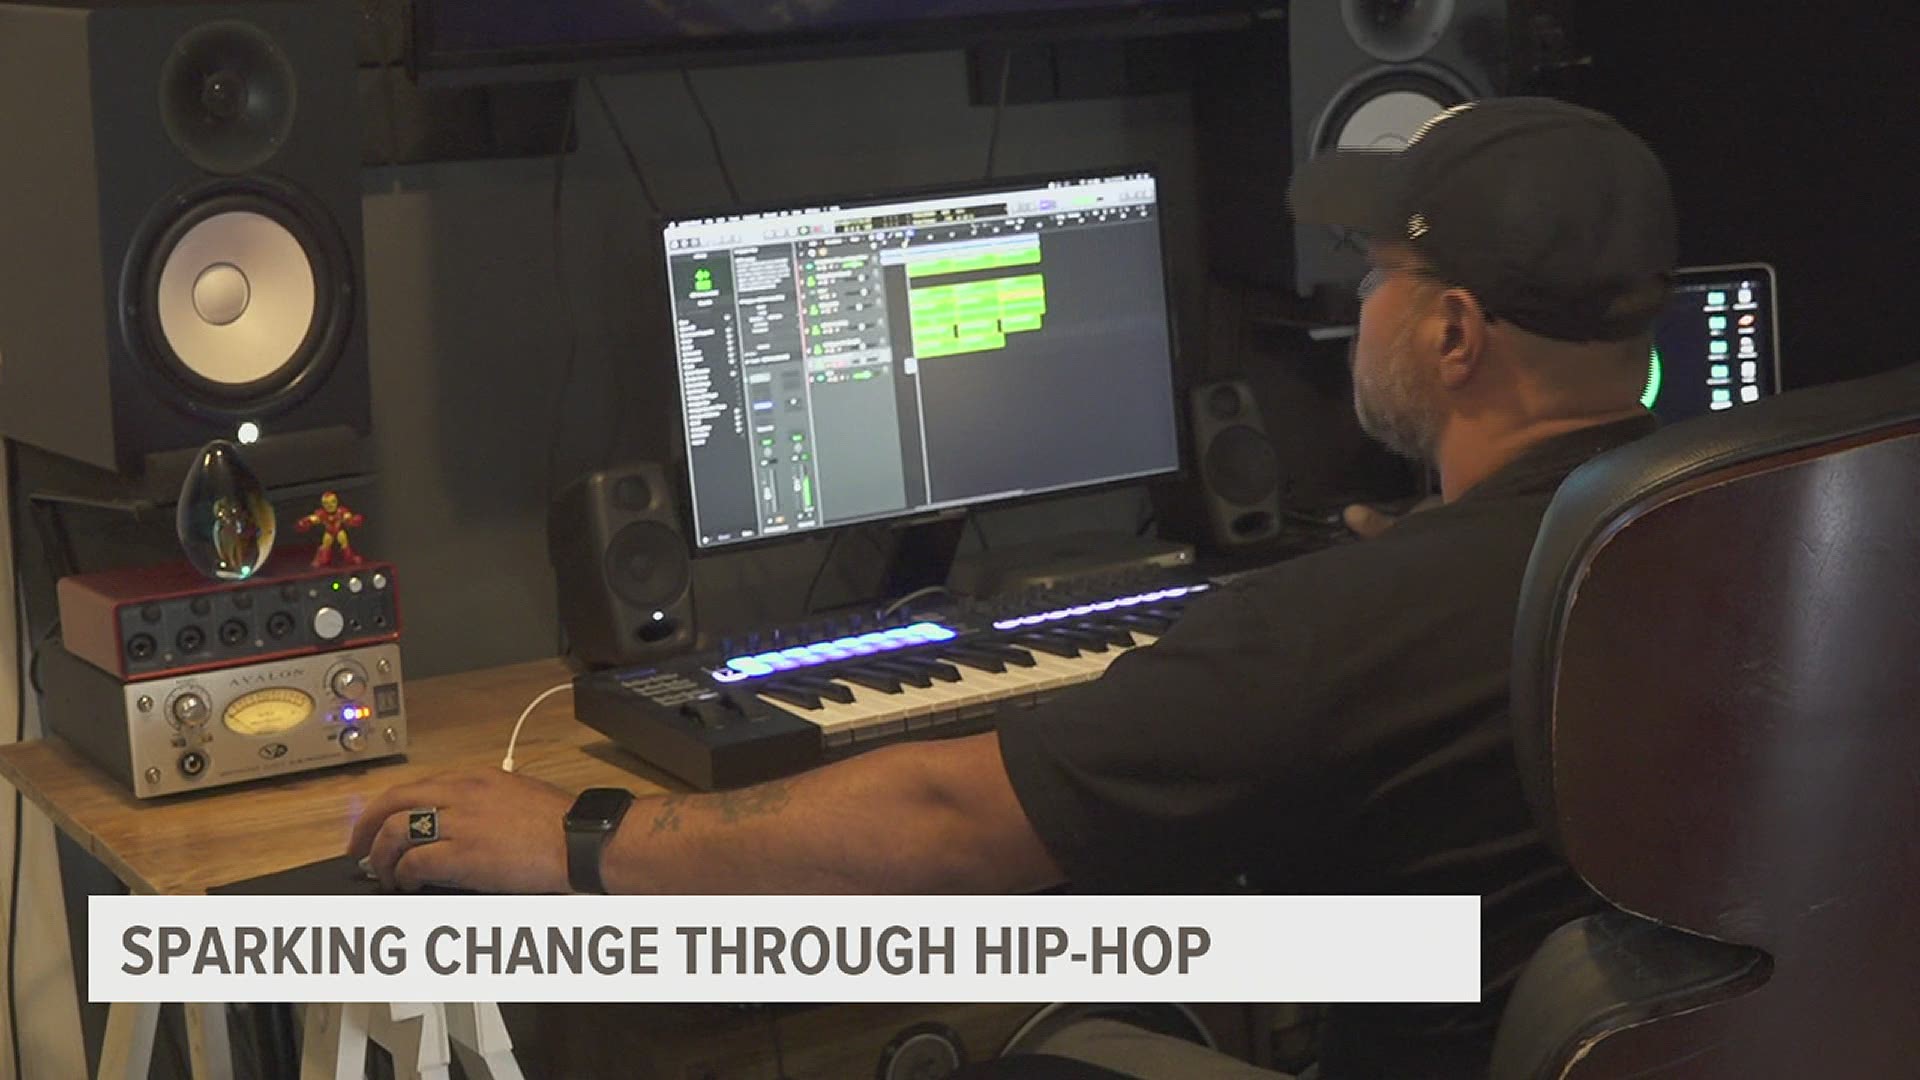 TJ Griffin and Jose Rios created "Creative Hope Studios." The initiative brings the creativity and influence of hip-hop to reach the hearts and minds of adolescents